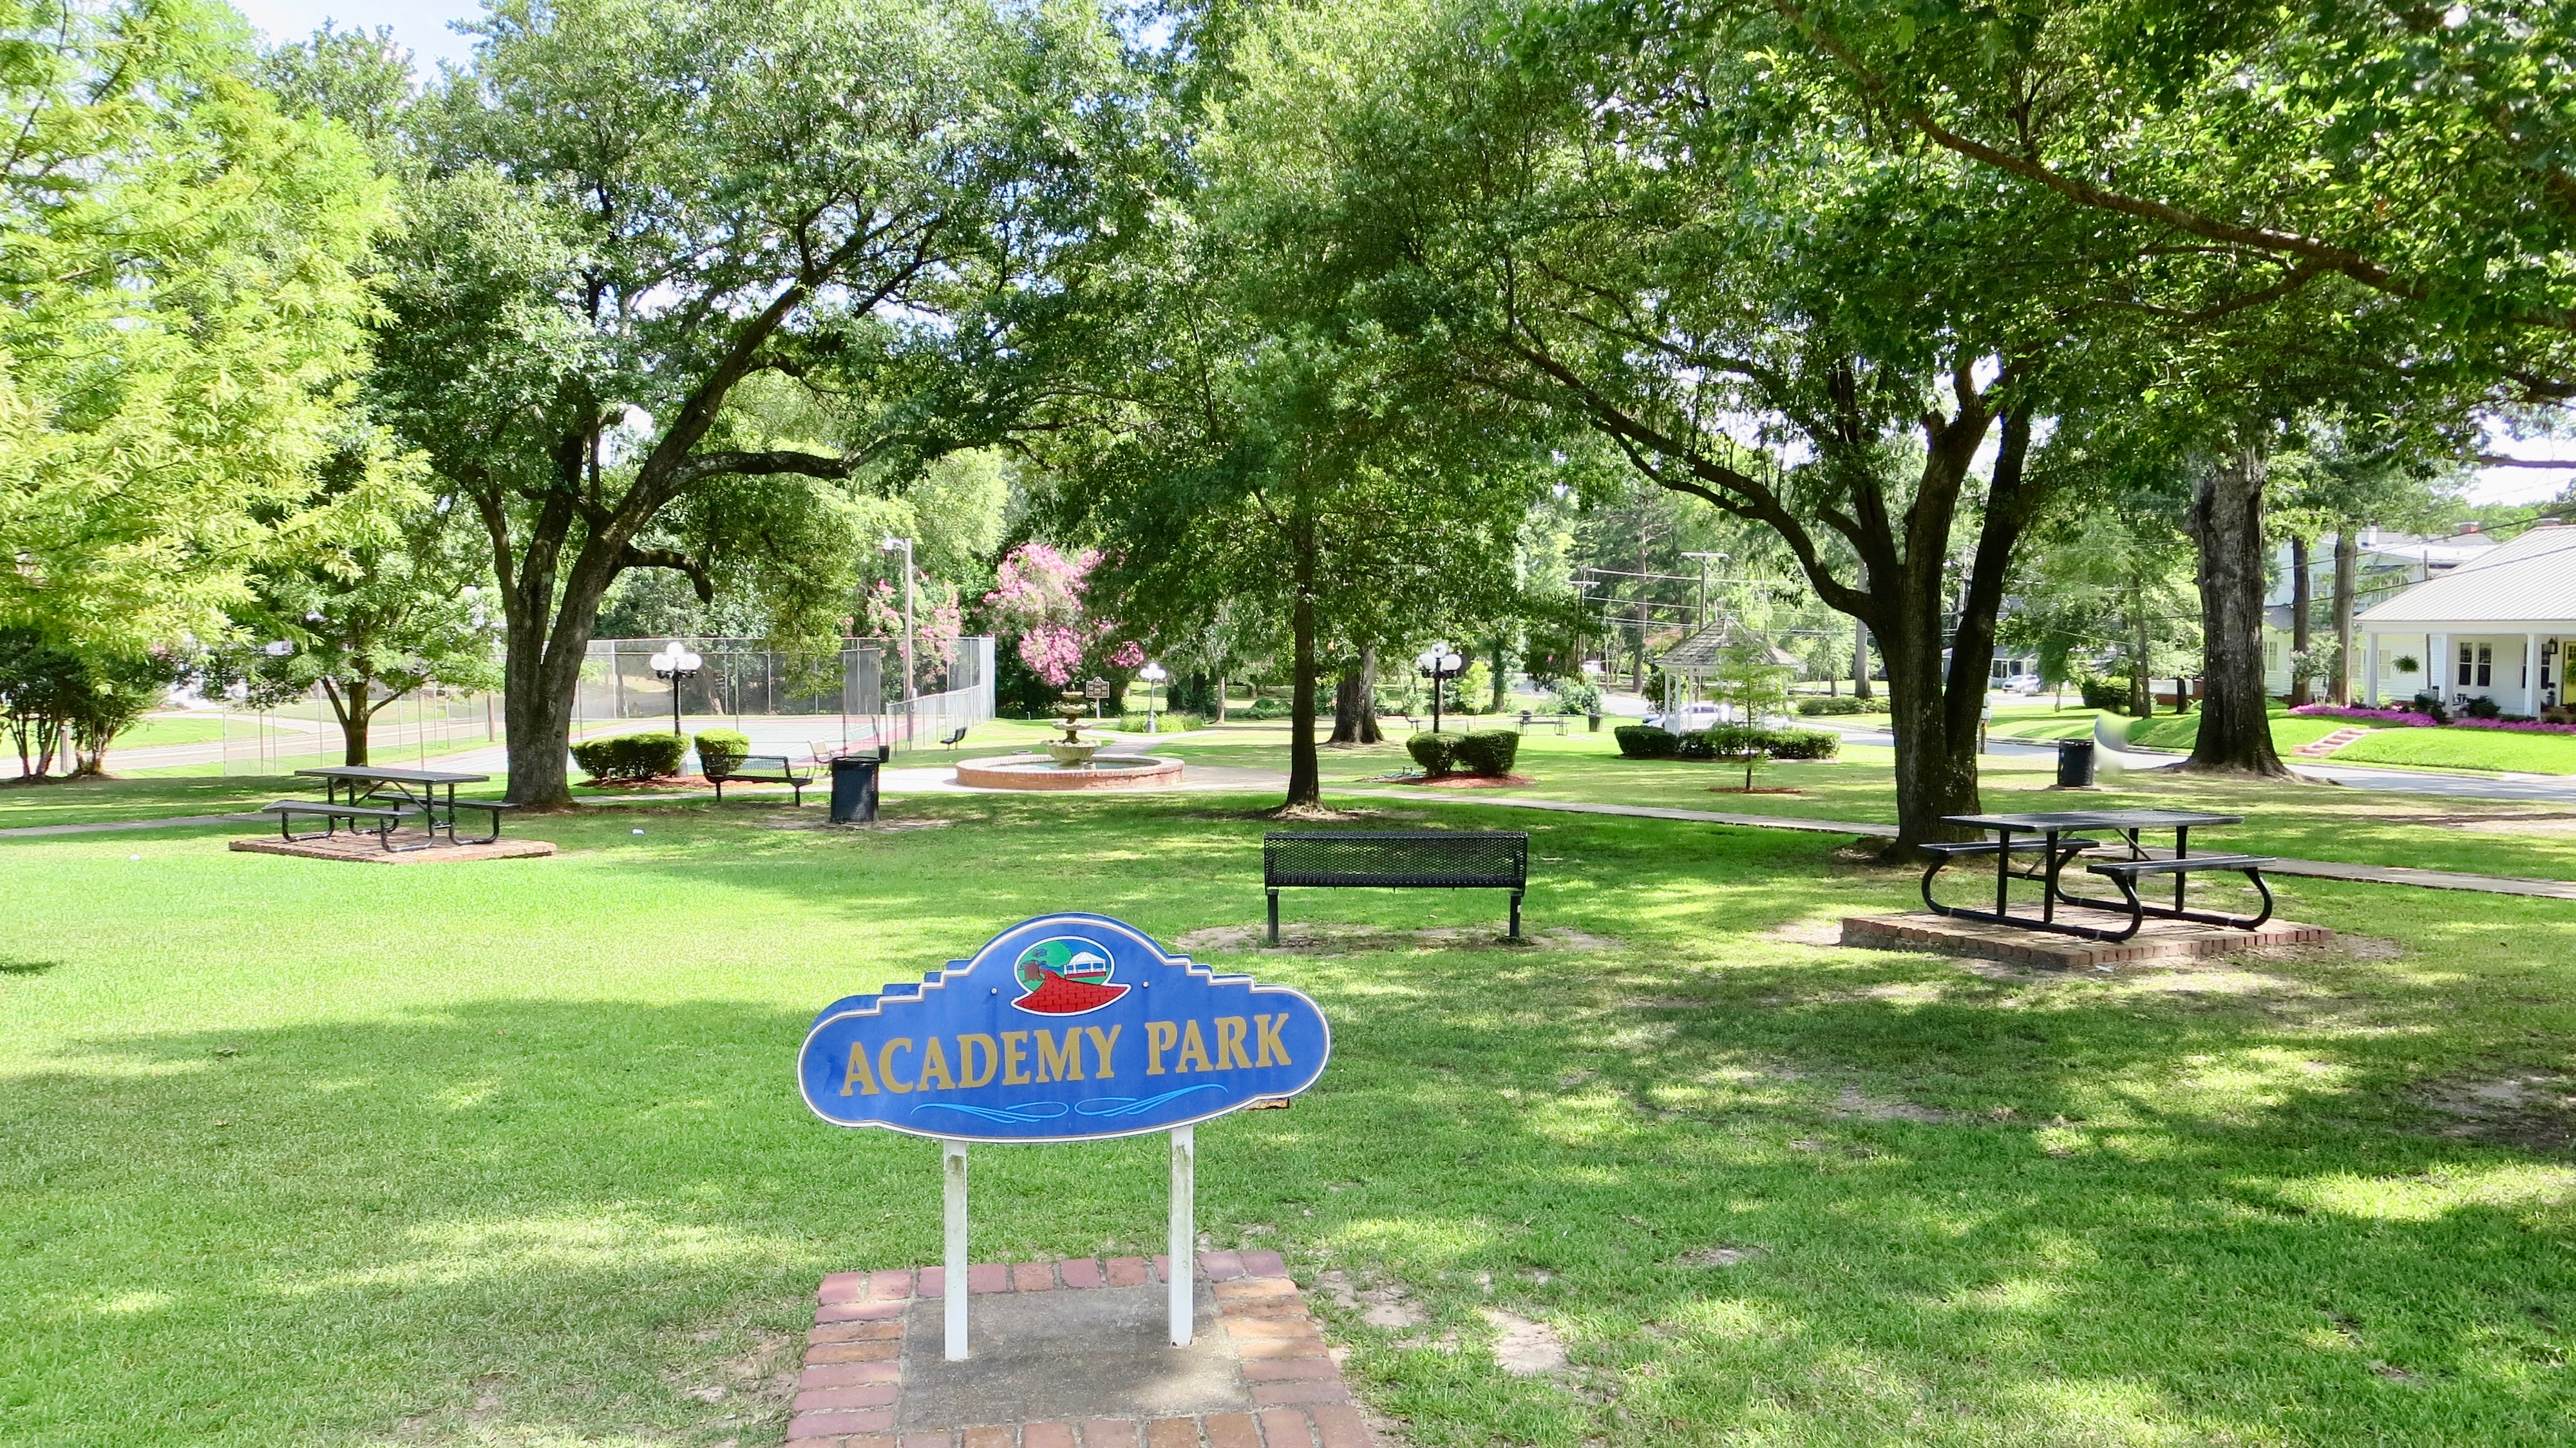 Academy Park Marker can be seen in far distance past the fountain.